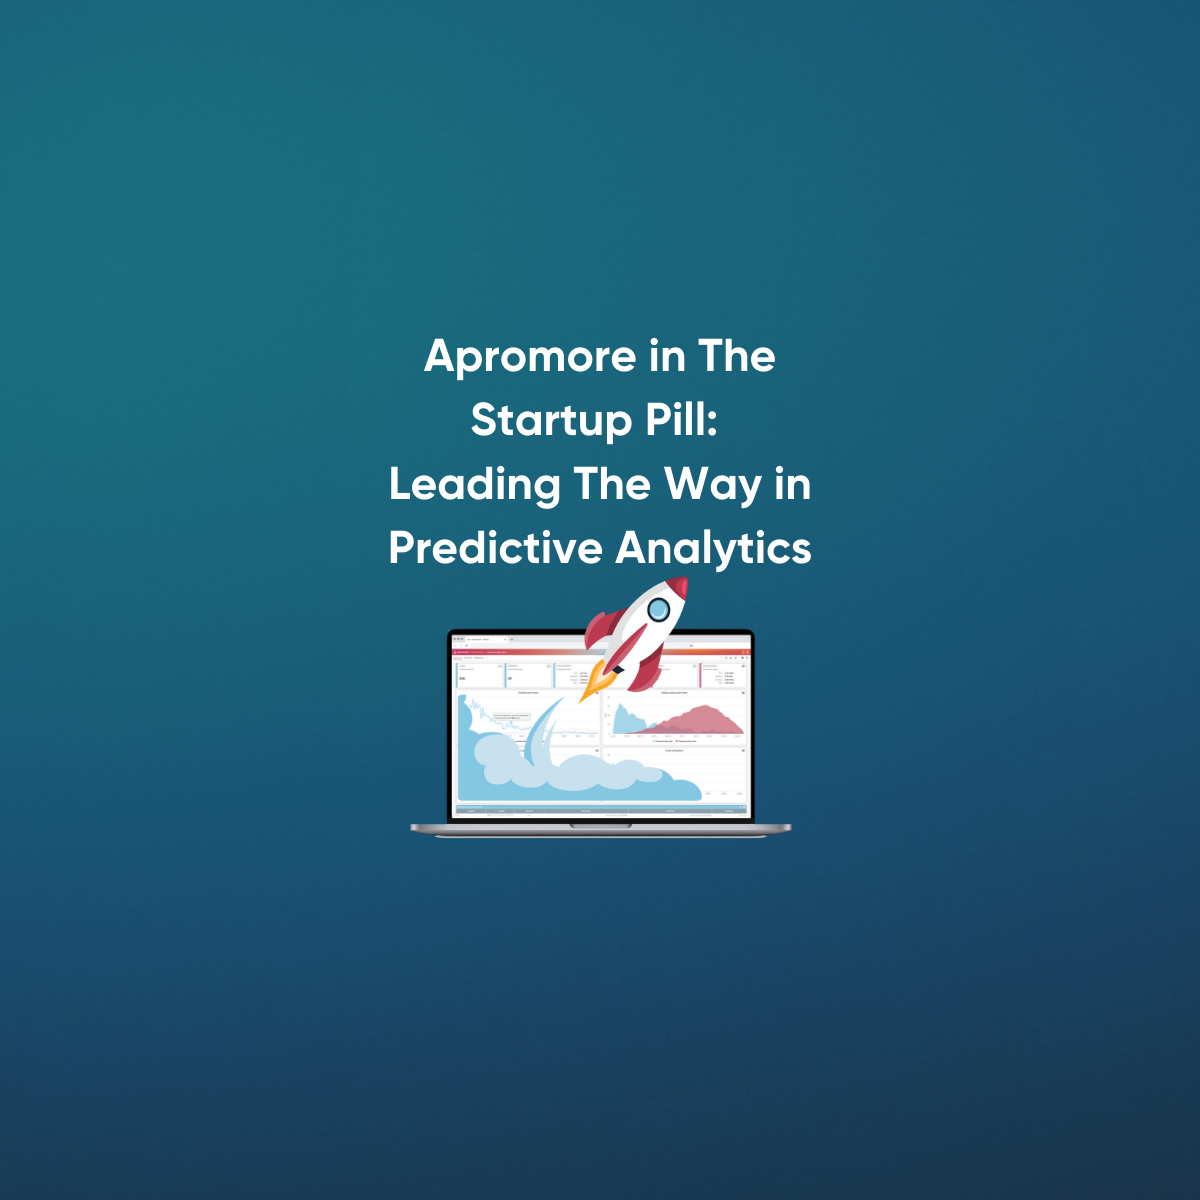 Apromore in The Startup Pill: Leading The Way in Predictive Analytics